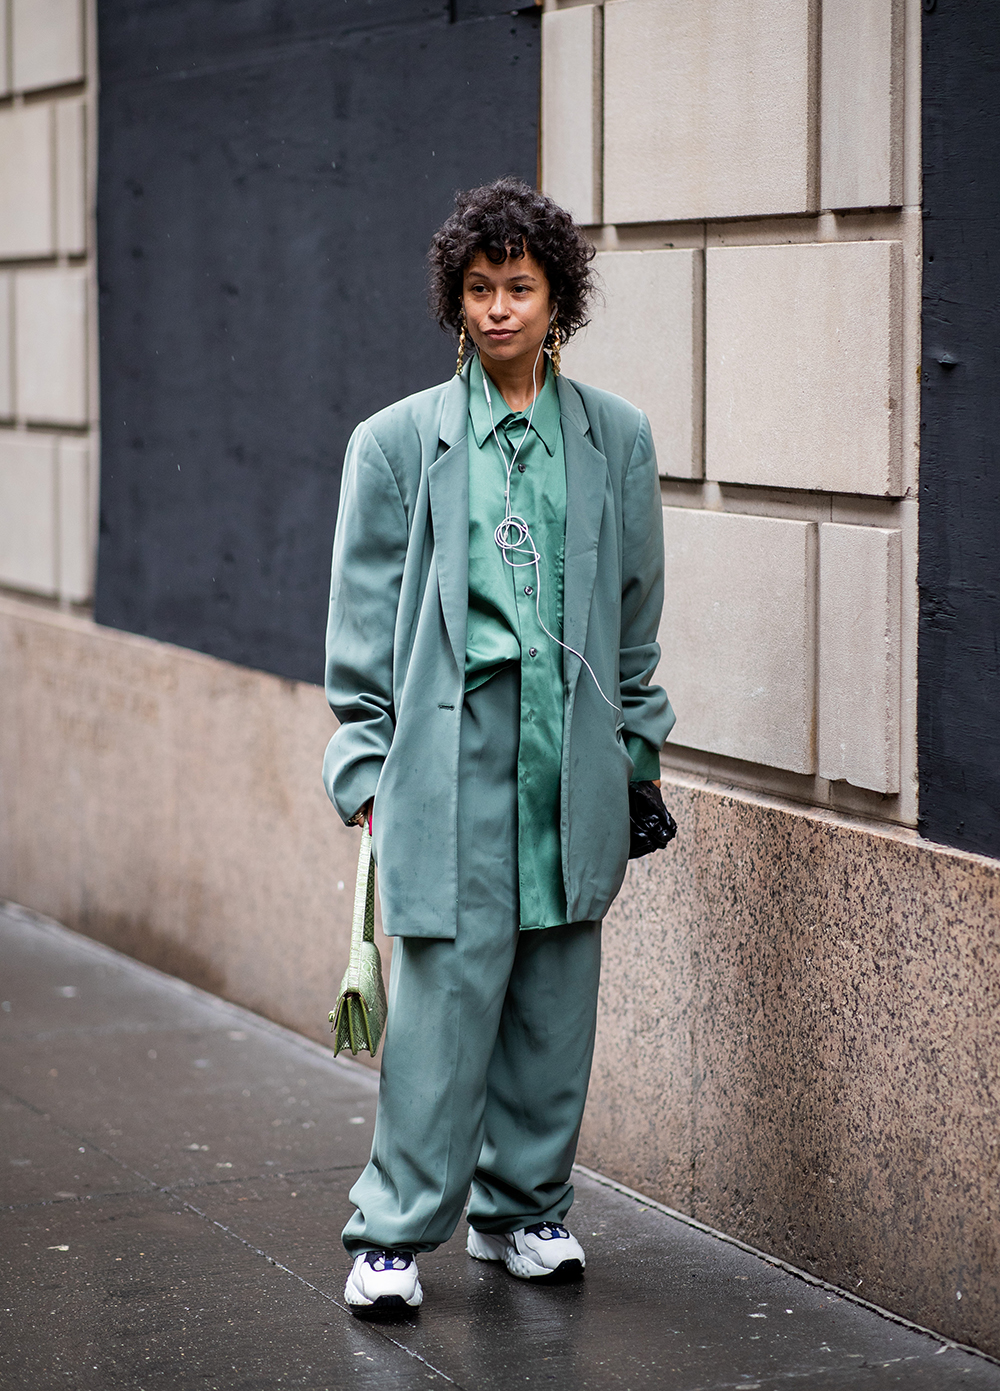 NEW YORK, NY - SEPTEMBER 09: A guest is seen outside Tibi during New York Fashion Week Spring/Summer 2019 on September 9, 2018 in New York City. (Photo by Christian Vierig/Getty Images)